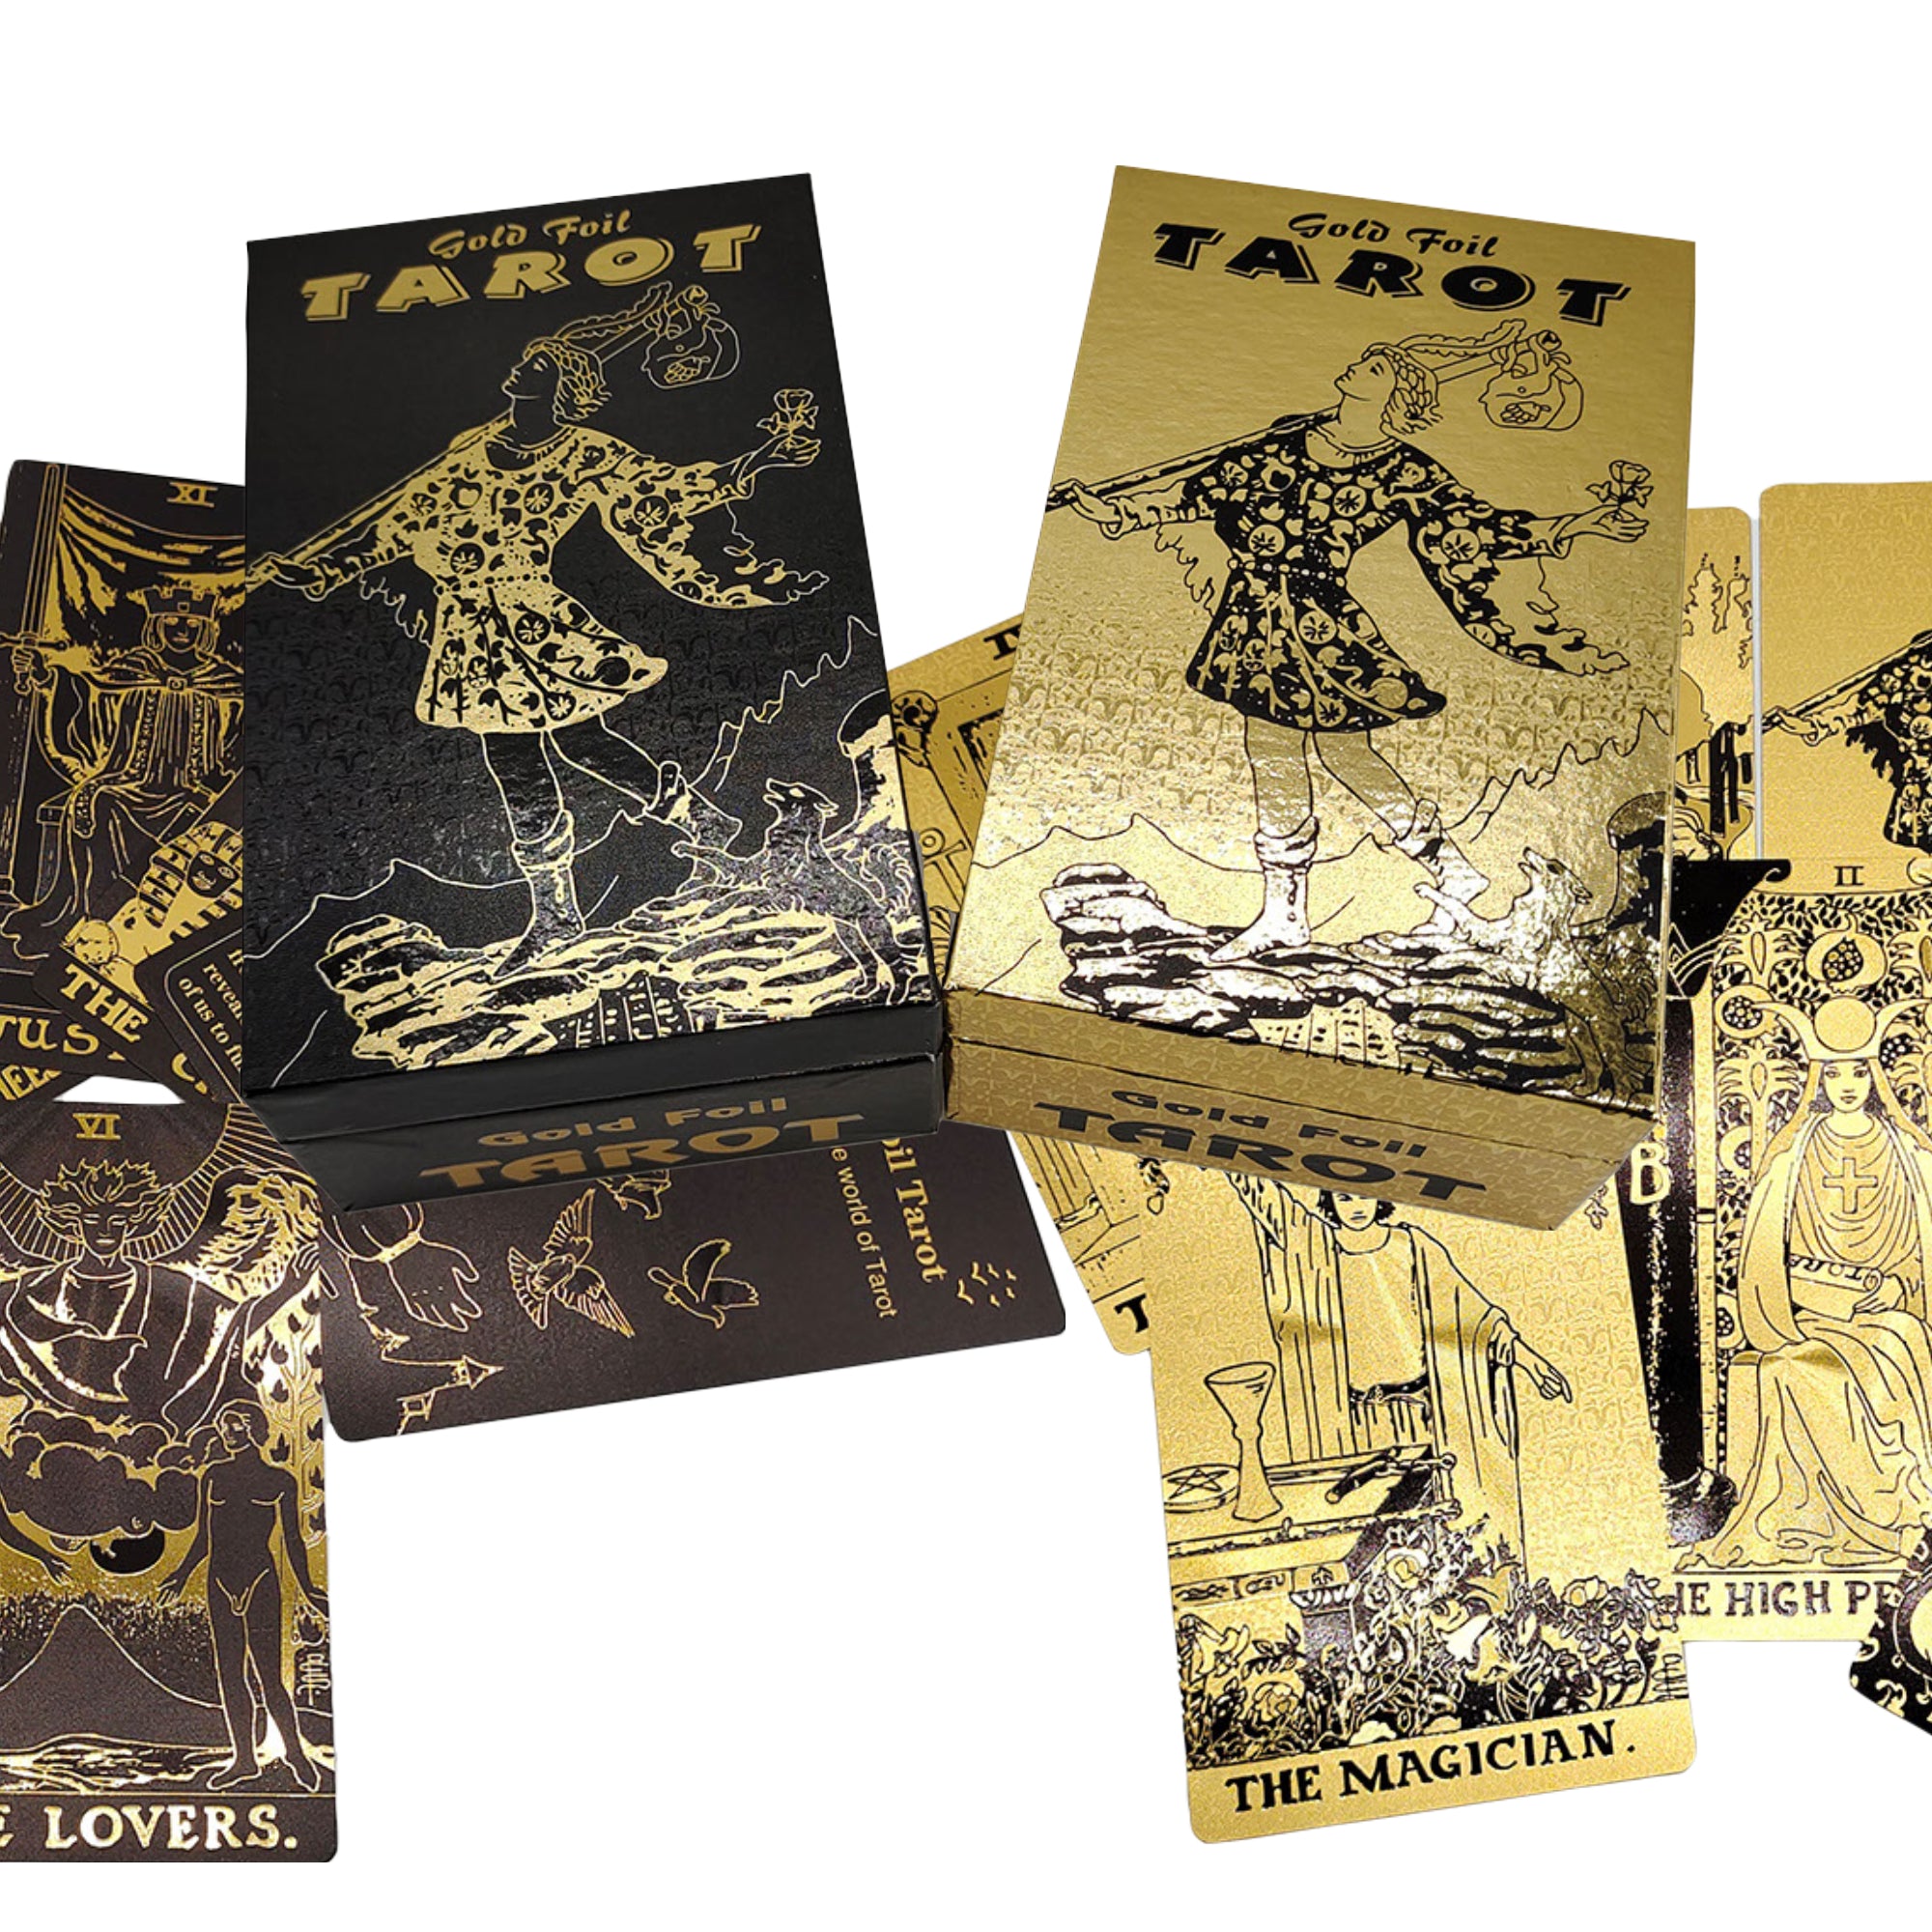 Black & Gold Foil Tarot Deck | Rider-Waite-Smith Remastered Cards For Beginner Tarot Readers And Tarot Collectors | Premium Gift Box With English Guidebook | Apollo Tarot